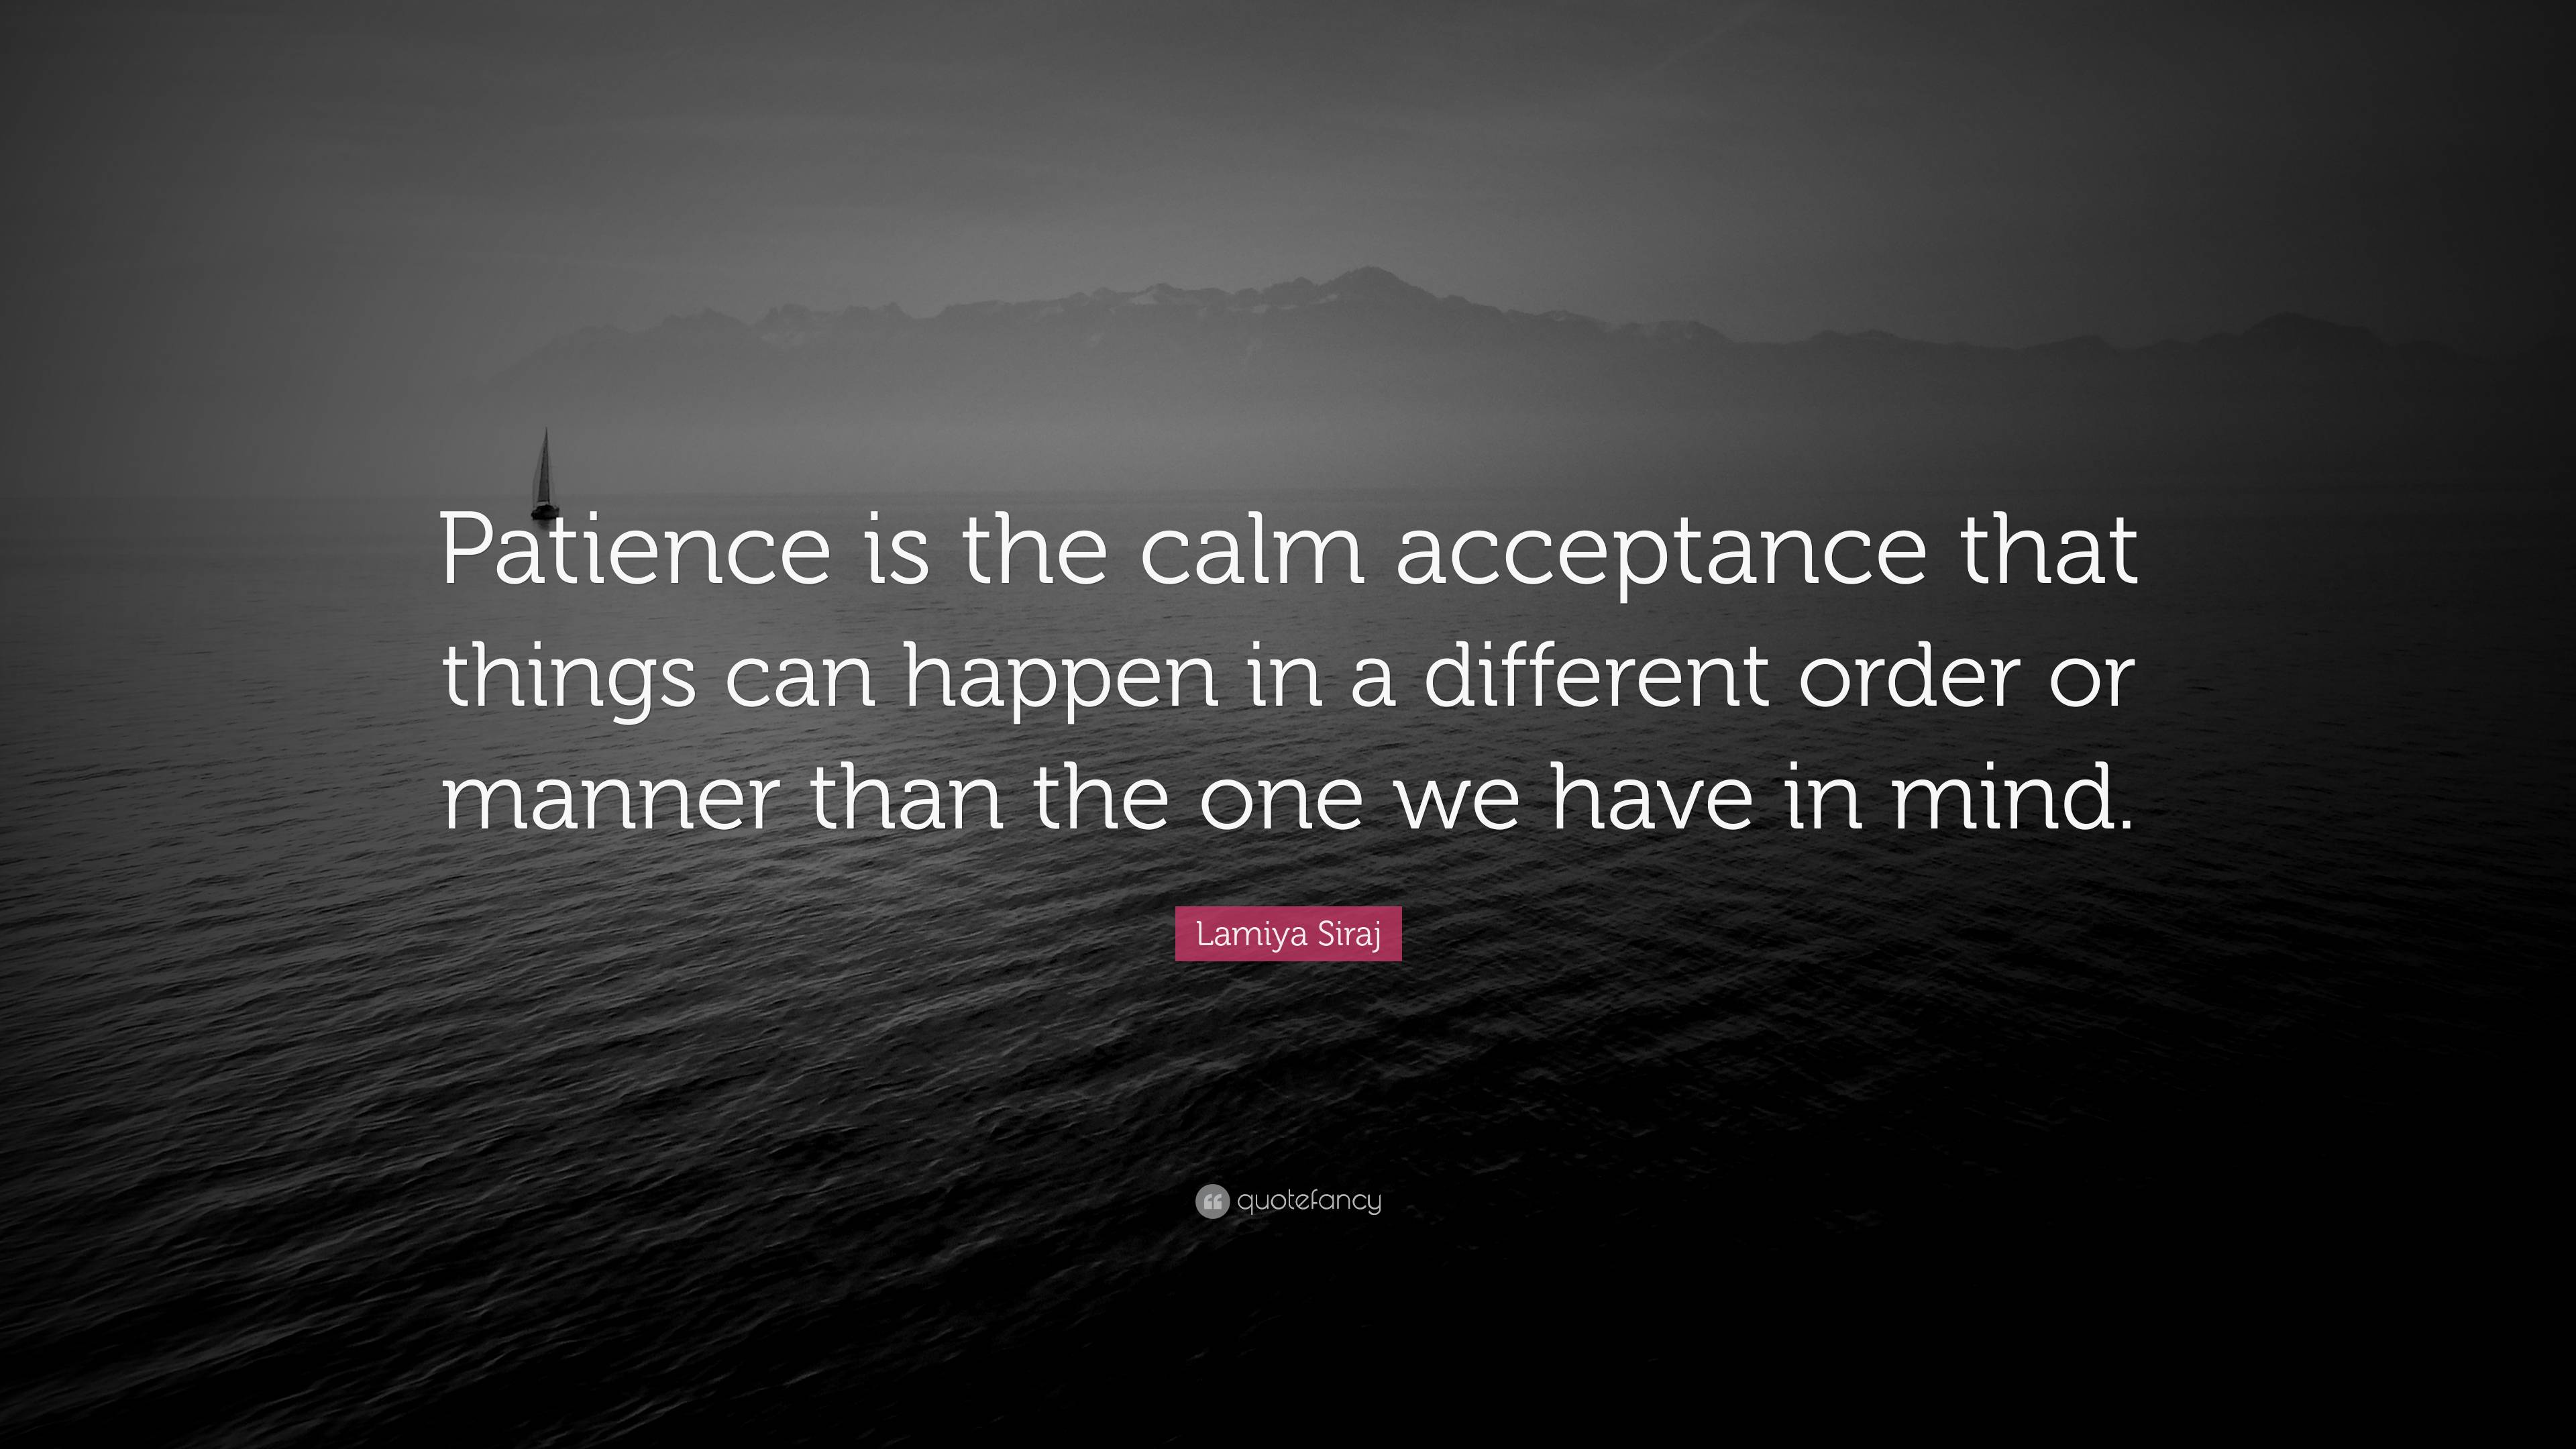 Lamiya Siraj Quote: “Patience is the calm acceptance that things can ...